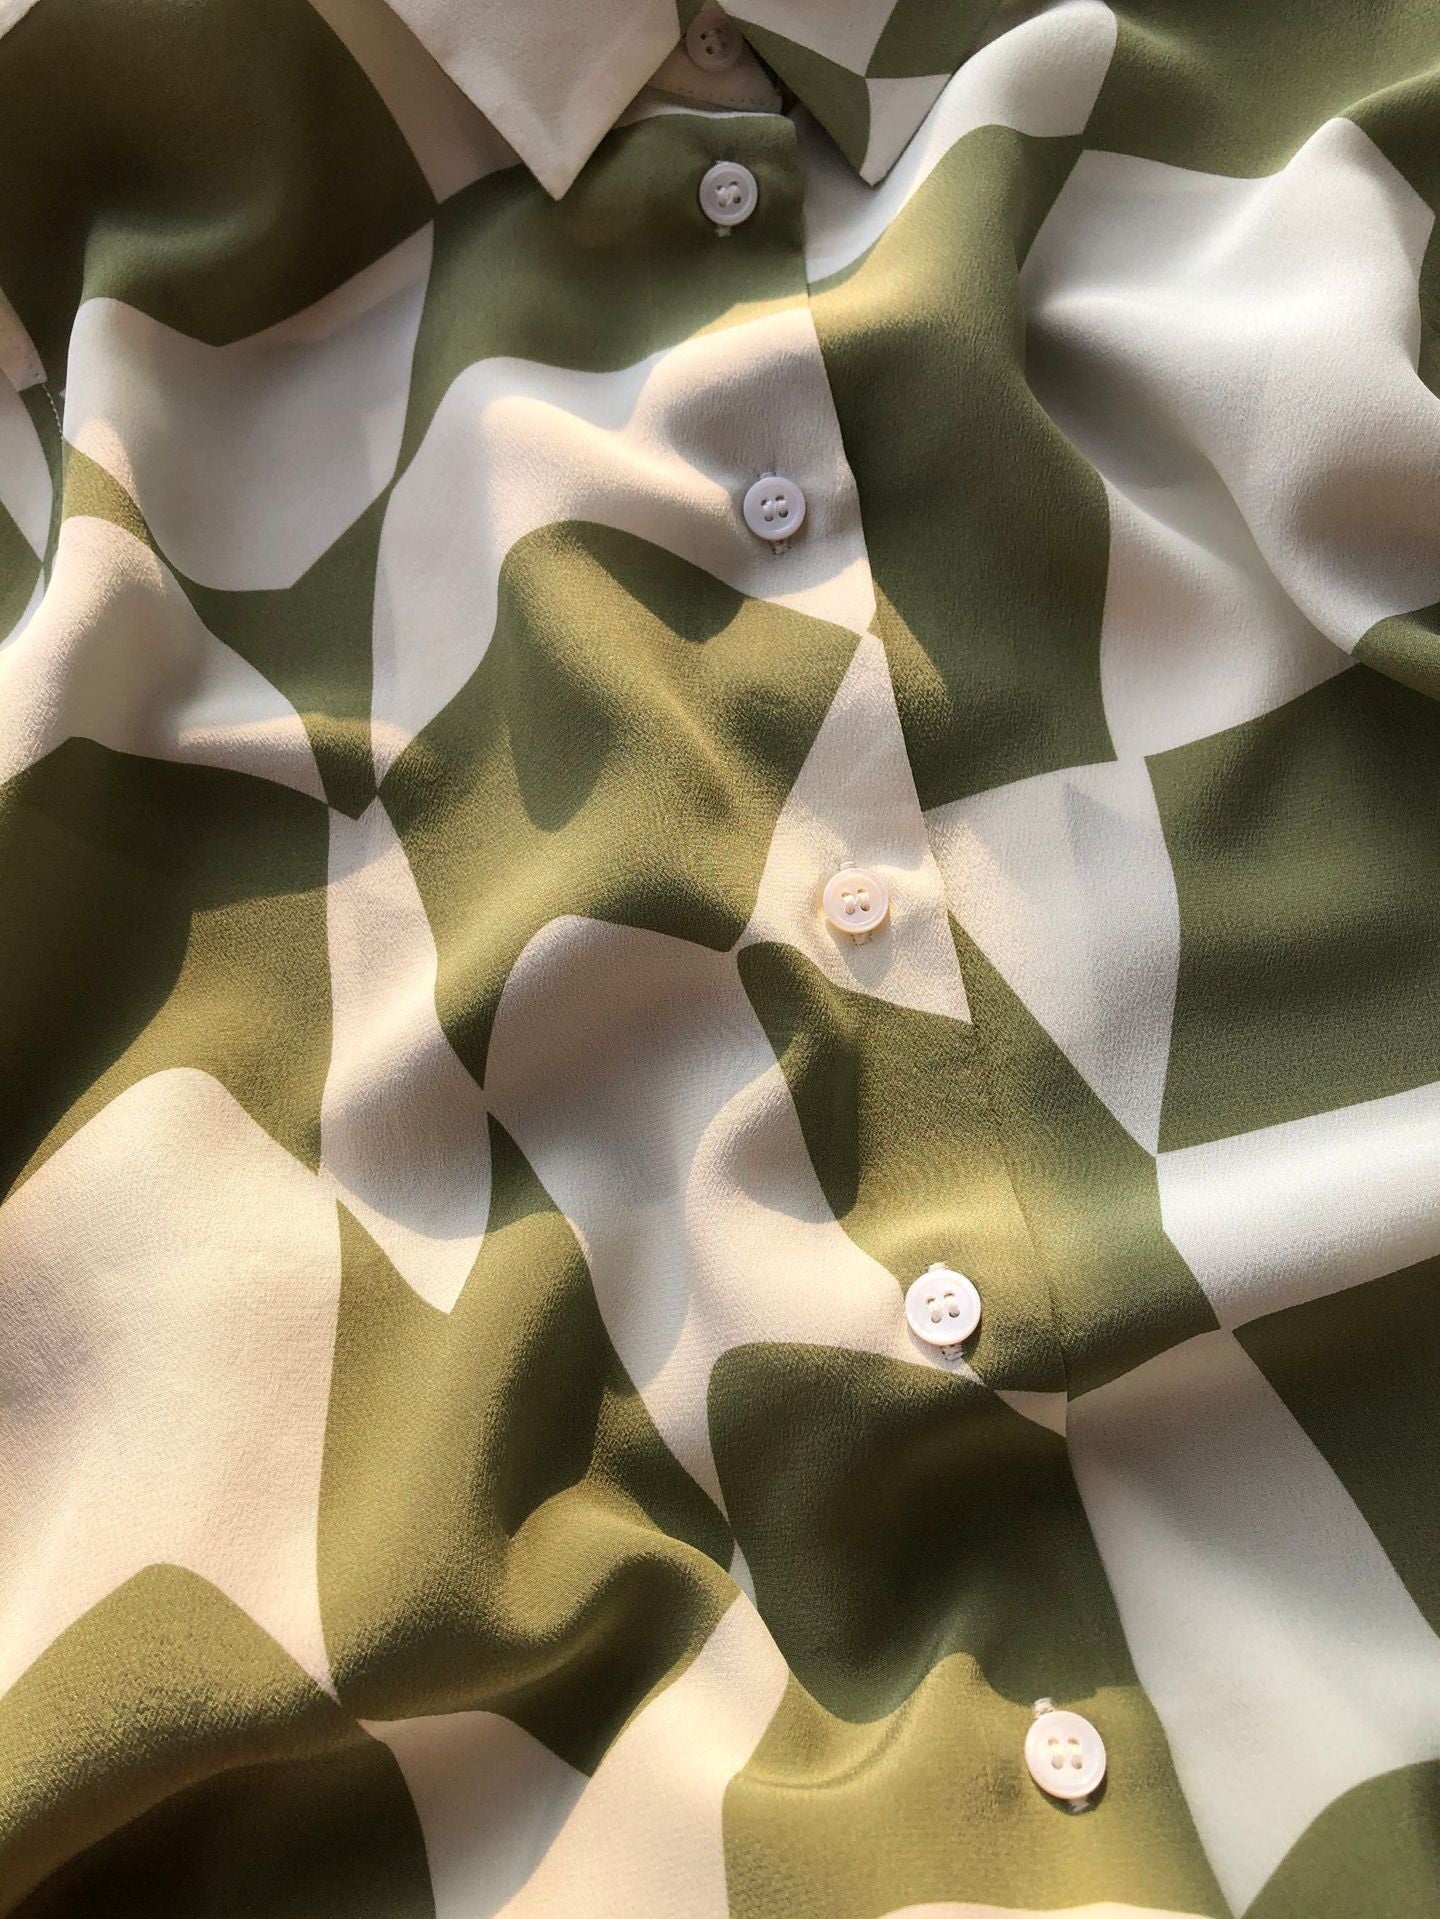 Nonothing |Luxurious real silk shirt in green print